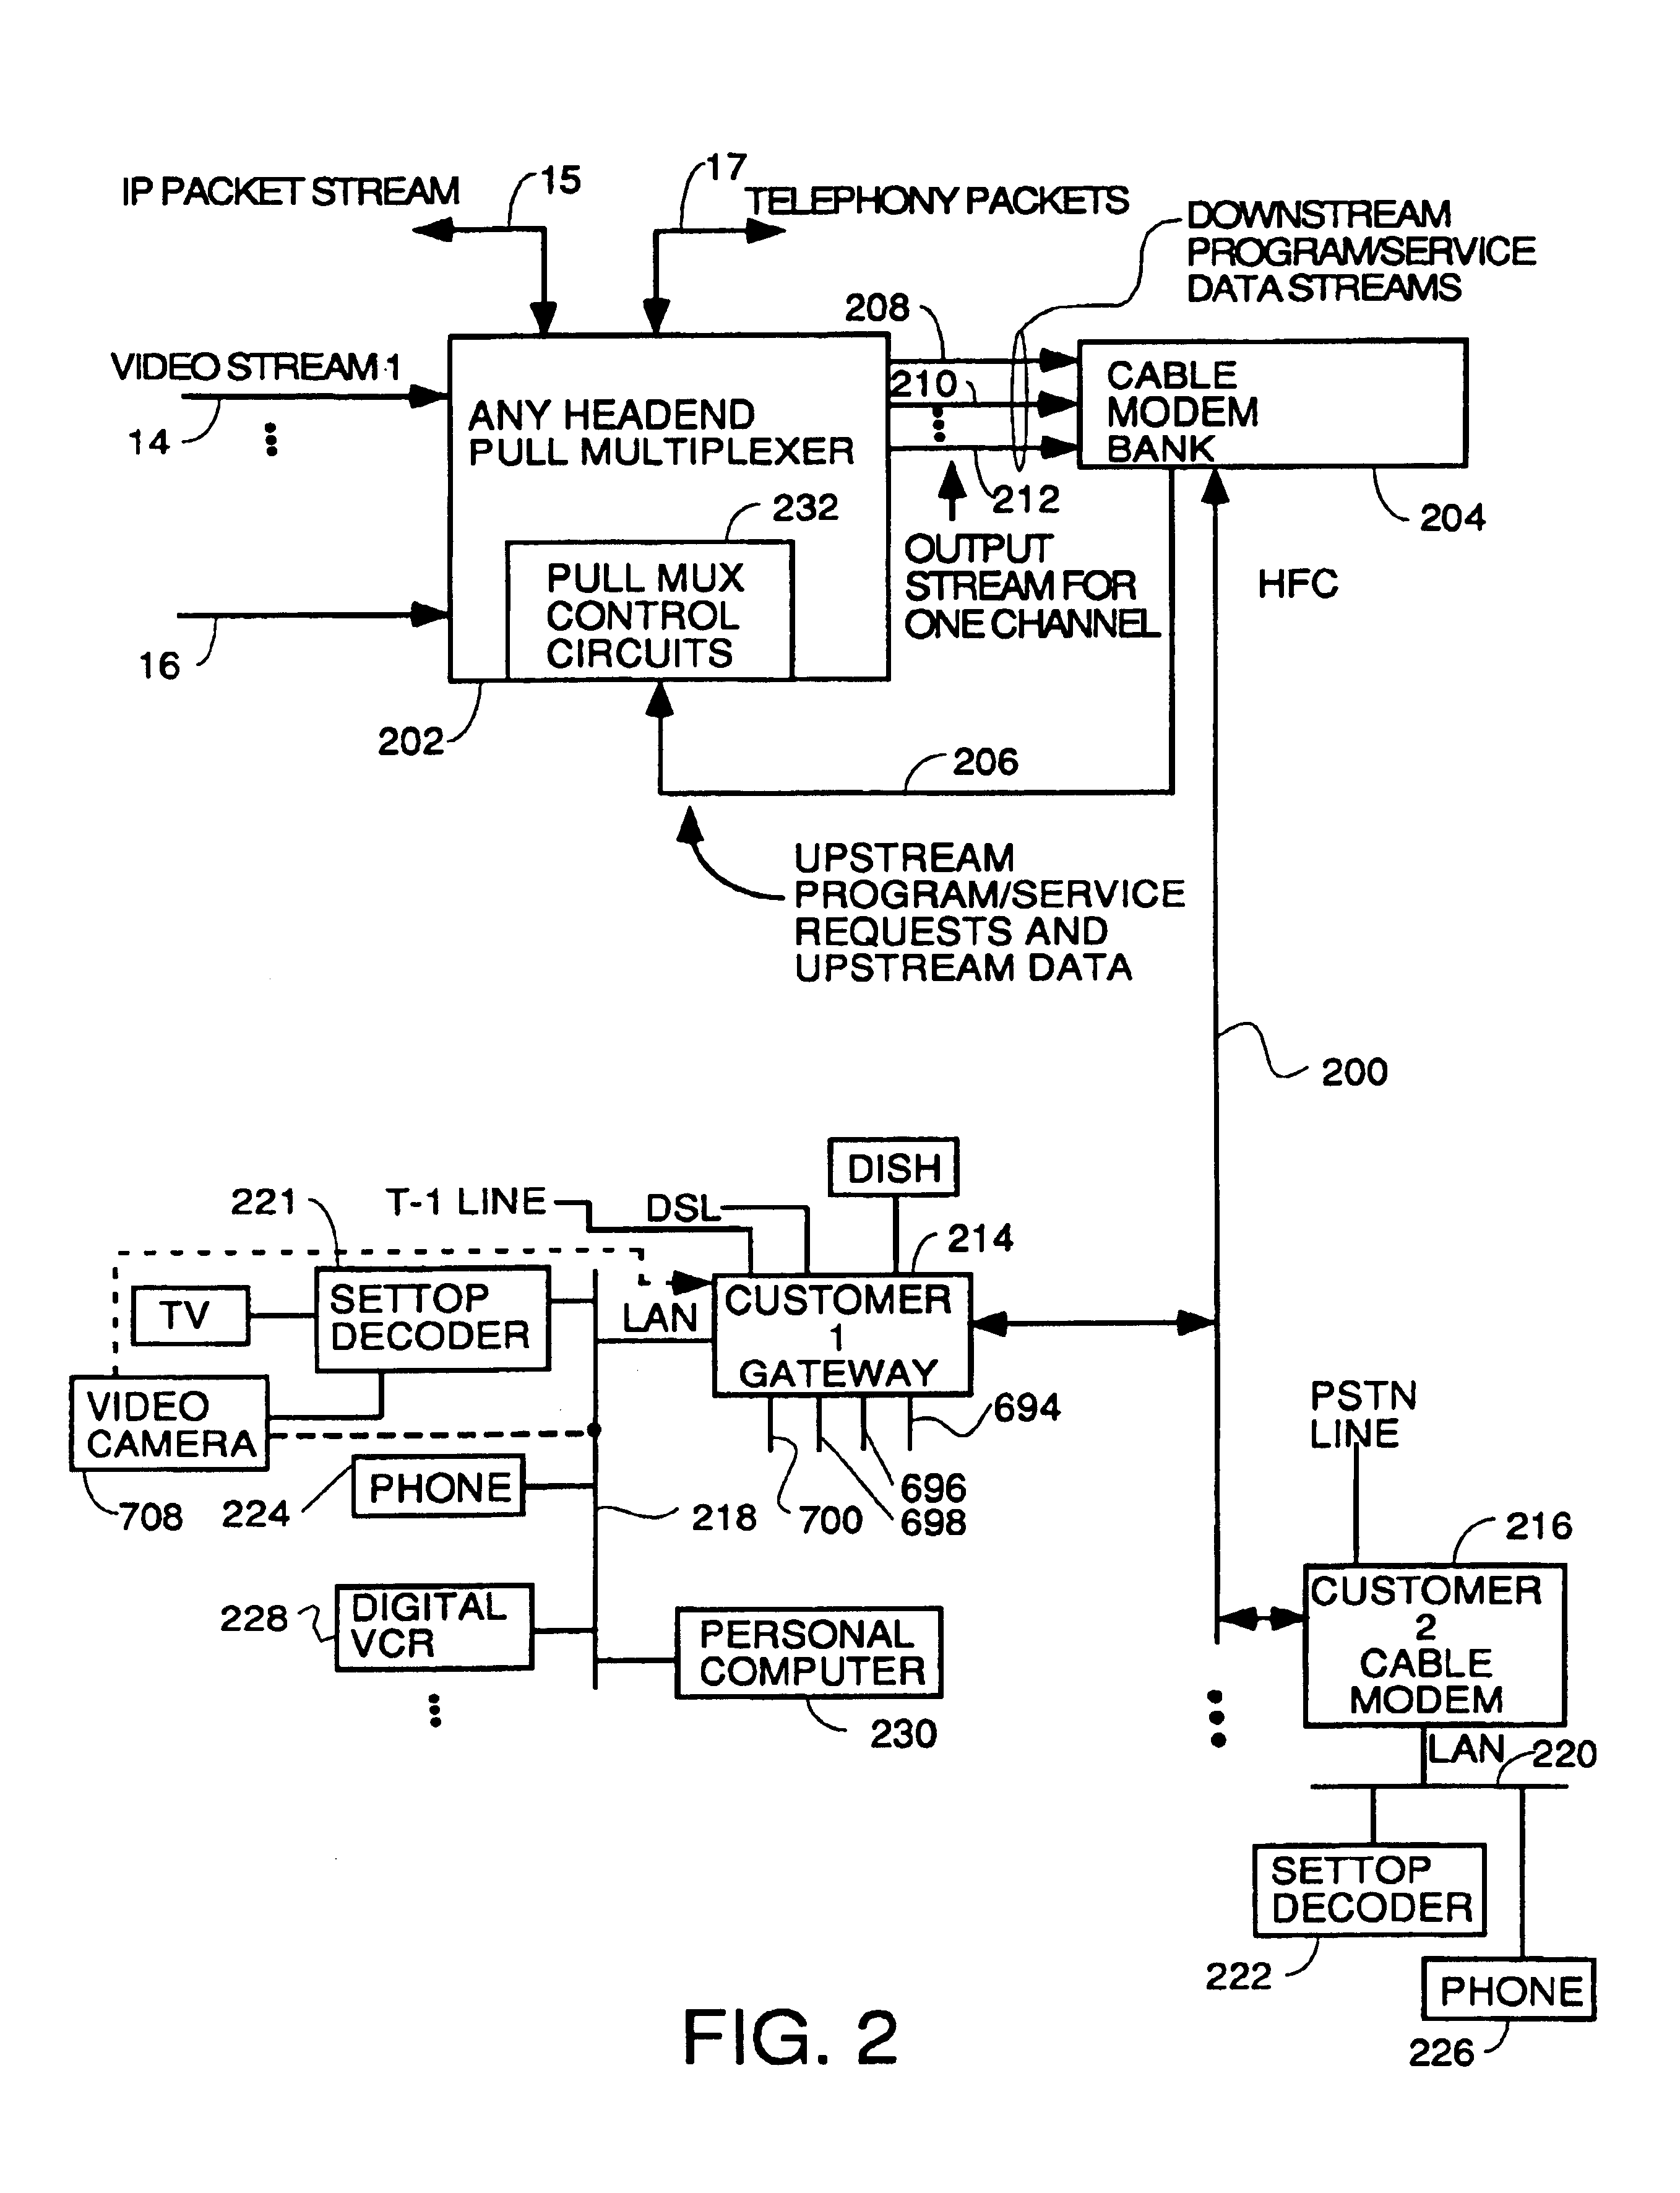 Process for supplying video-on-demand and other requested programs and services from a headend